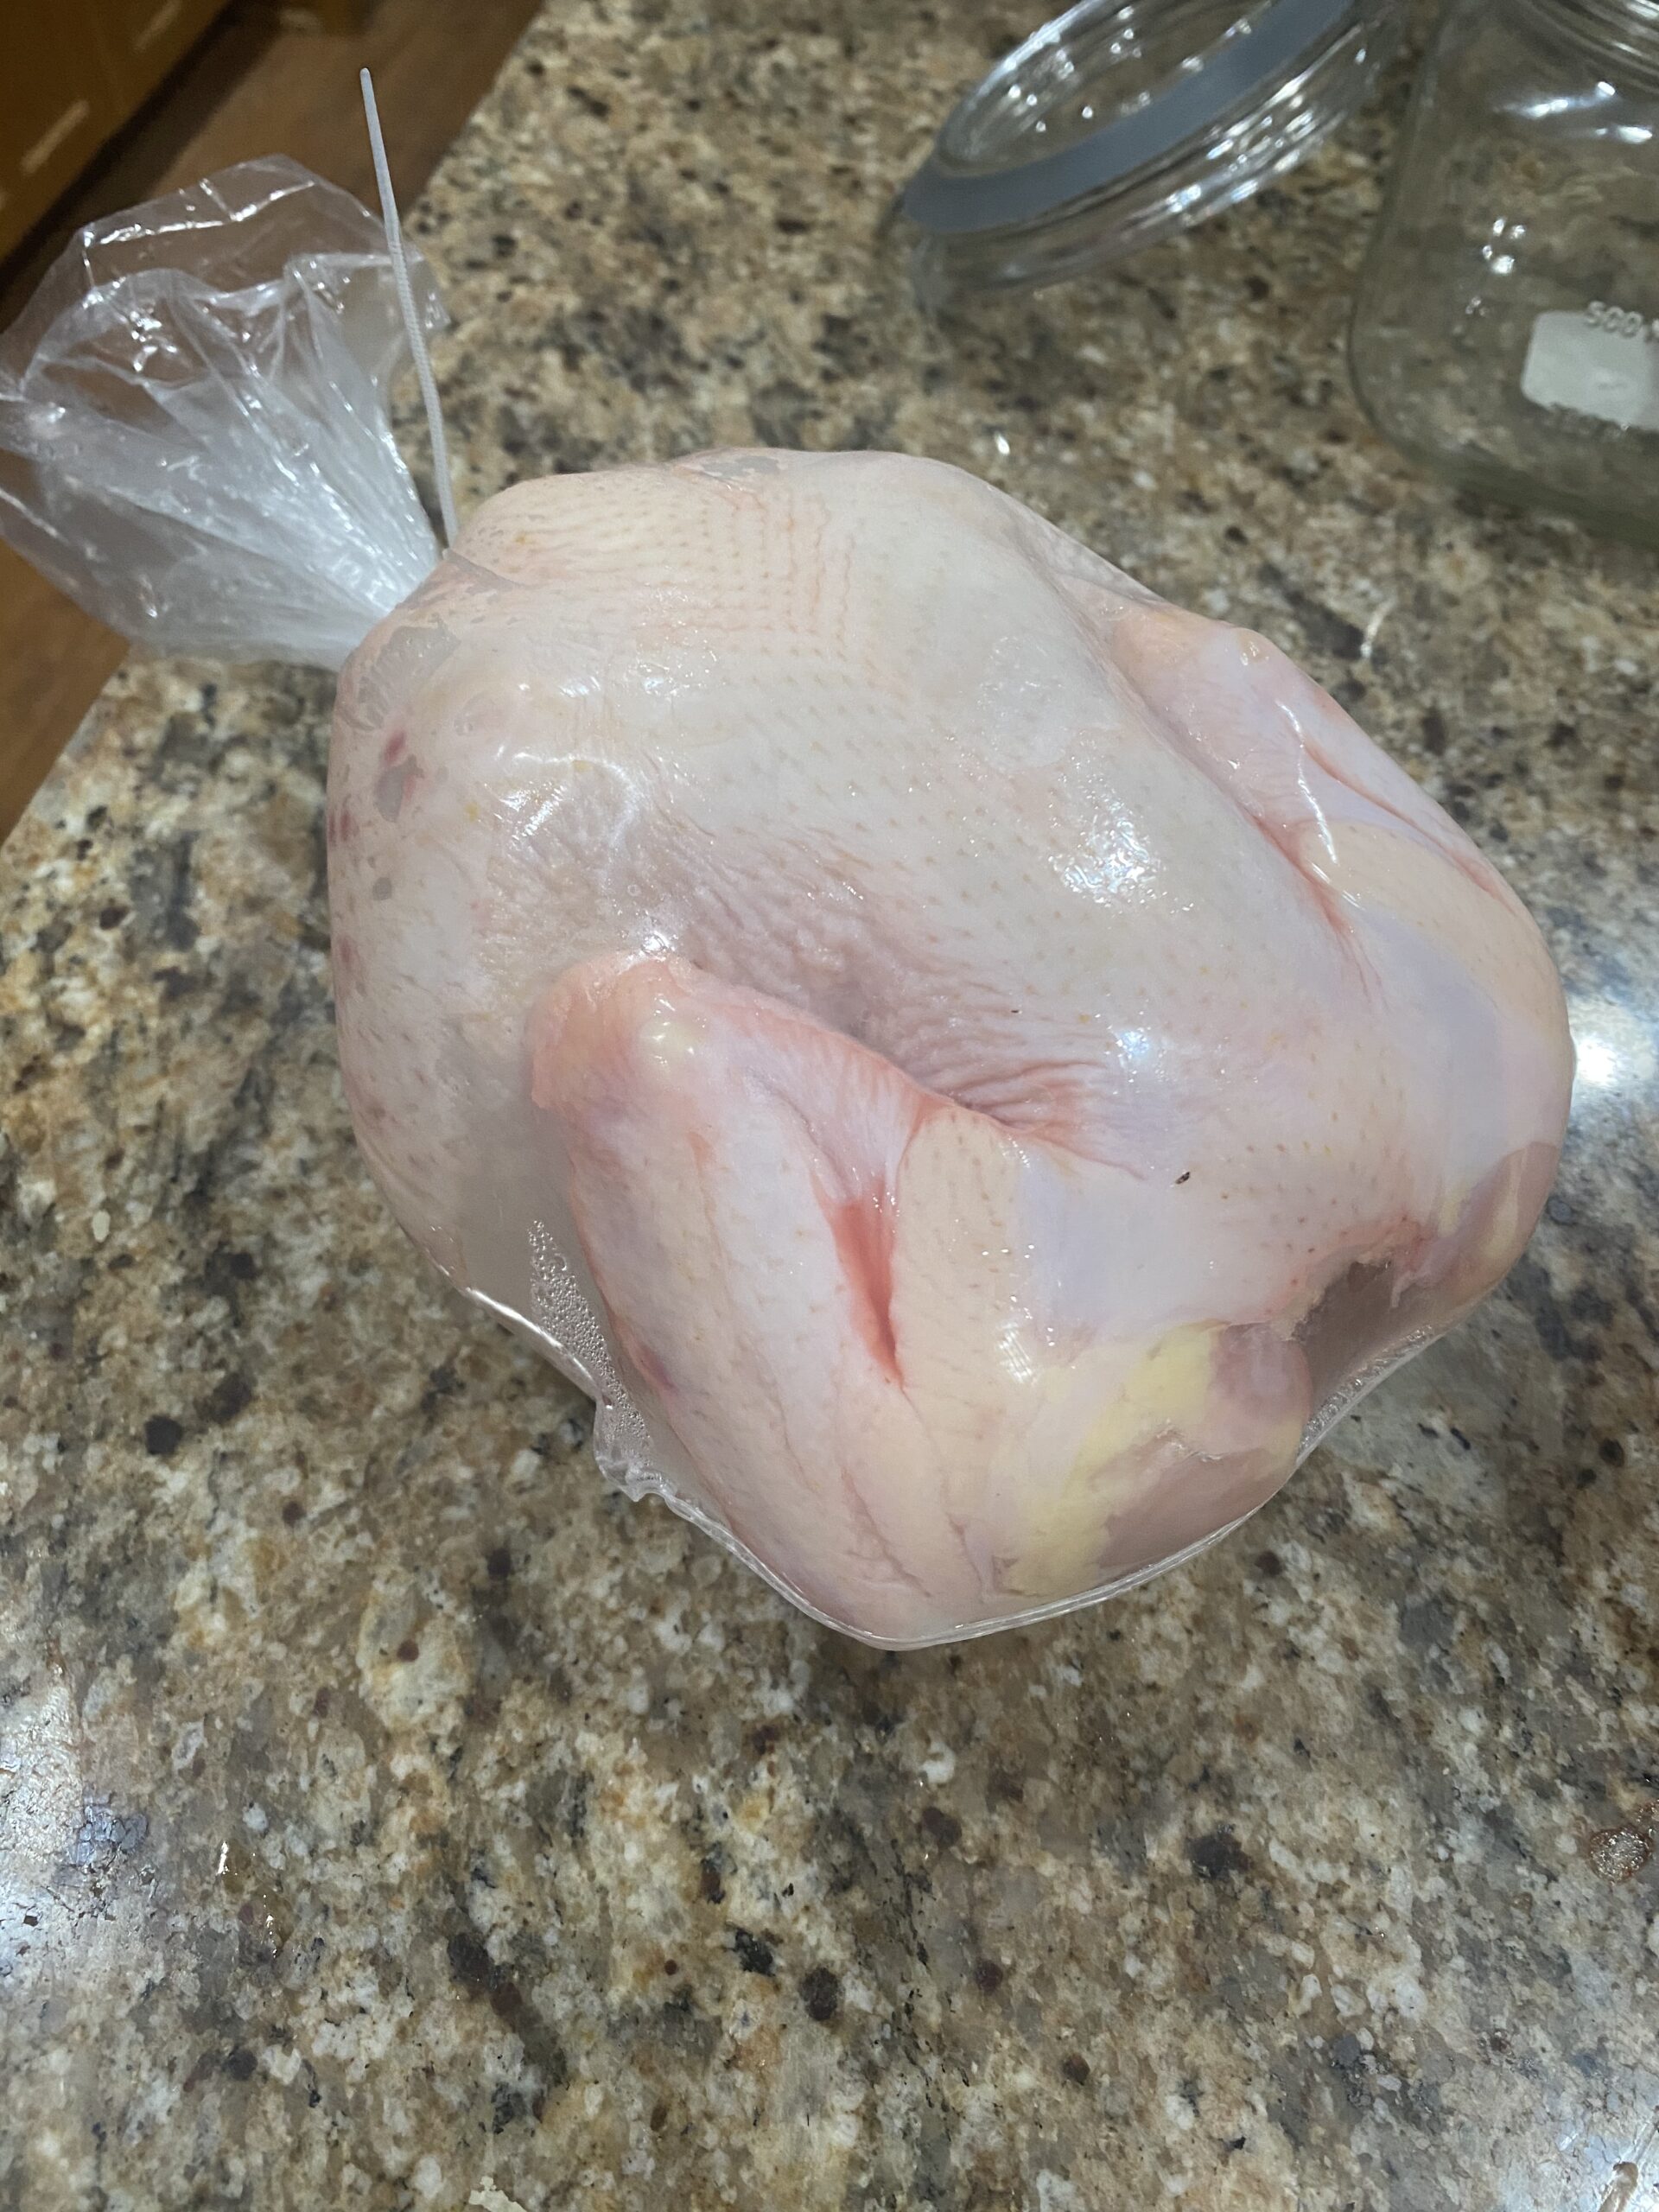 Whole chickens $5.75/lb - 4 lb average weight